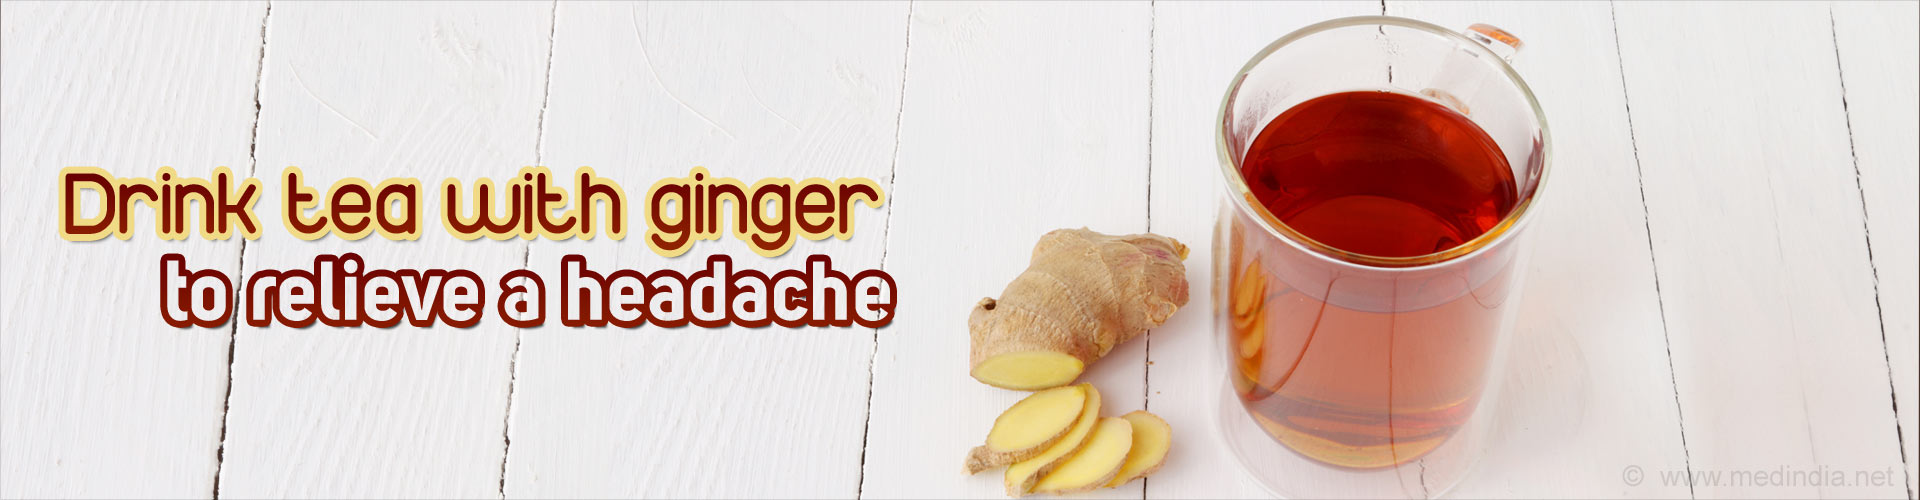 Drink tea with ginger to relieve a headache